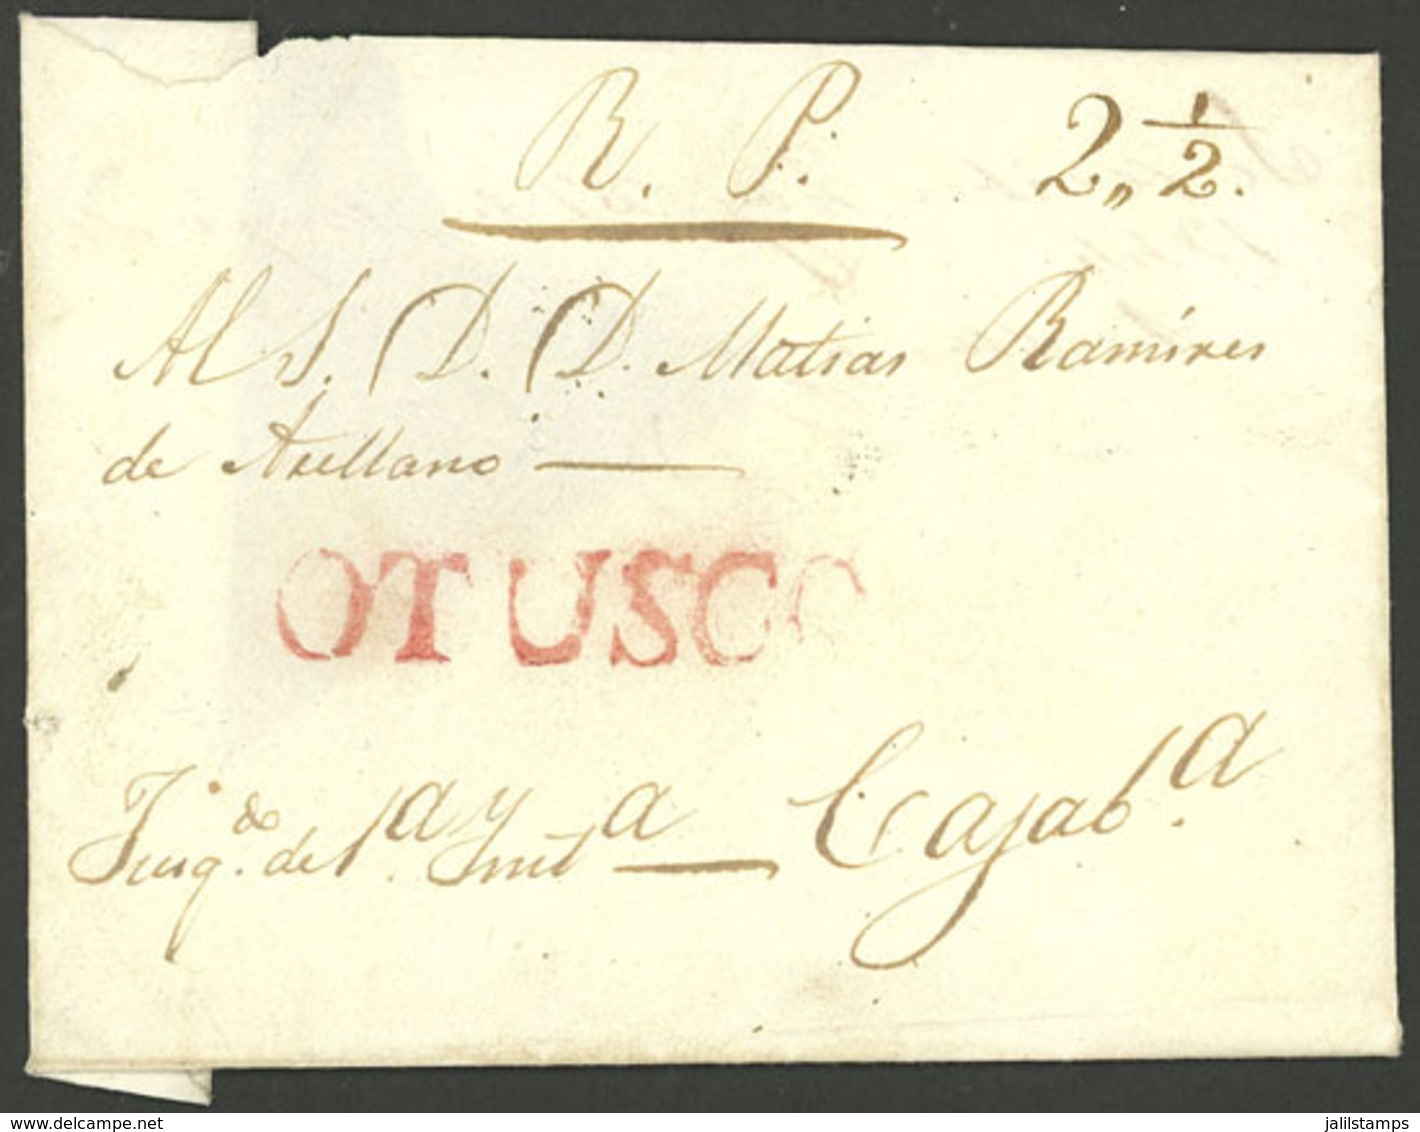 PERU: Folded Cover Dated 27/MAY/1844  With The Red Mark OTUSCO, Very Fine Quality! - Peru